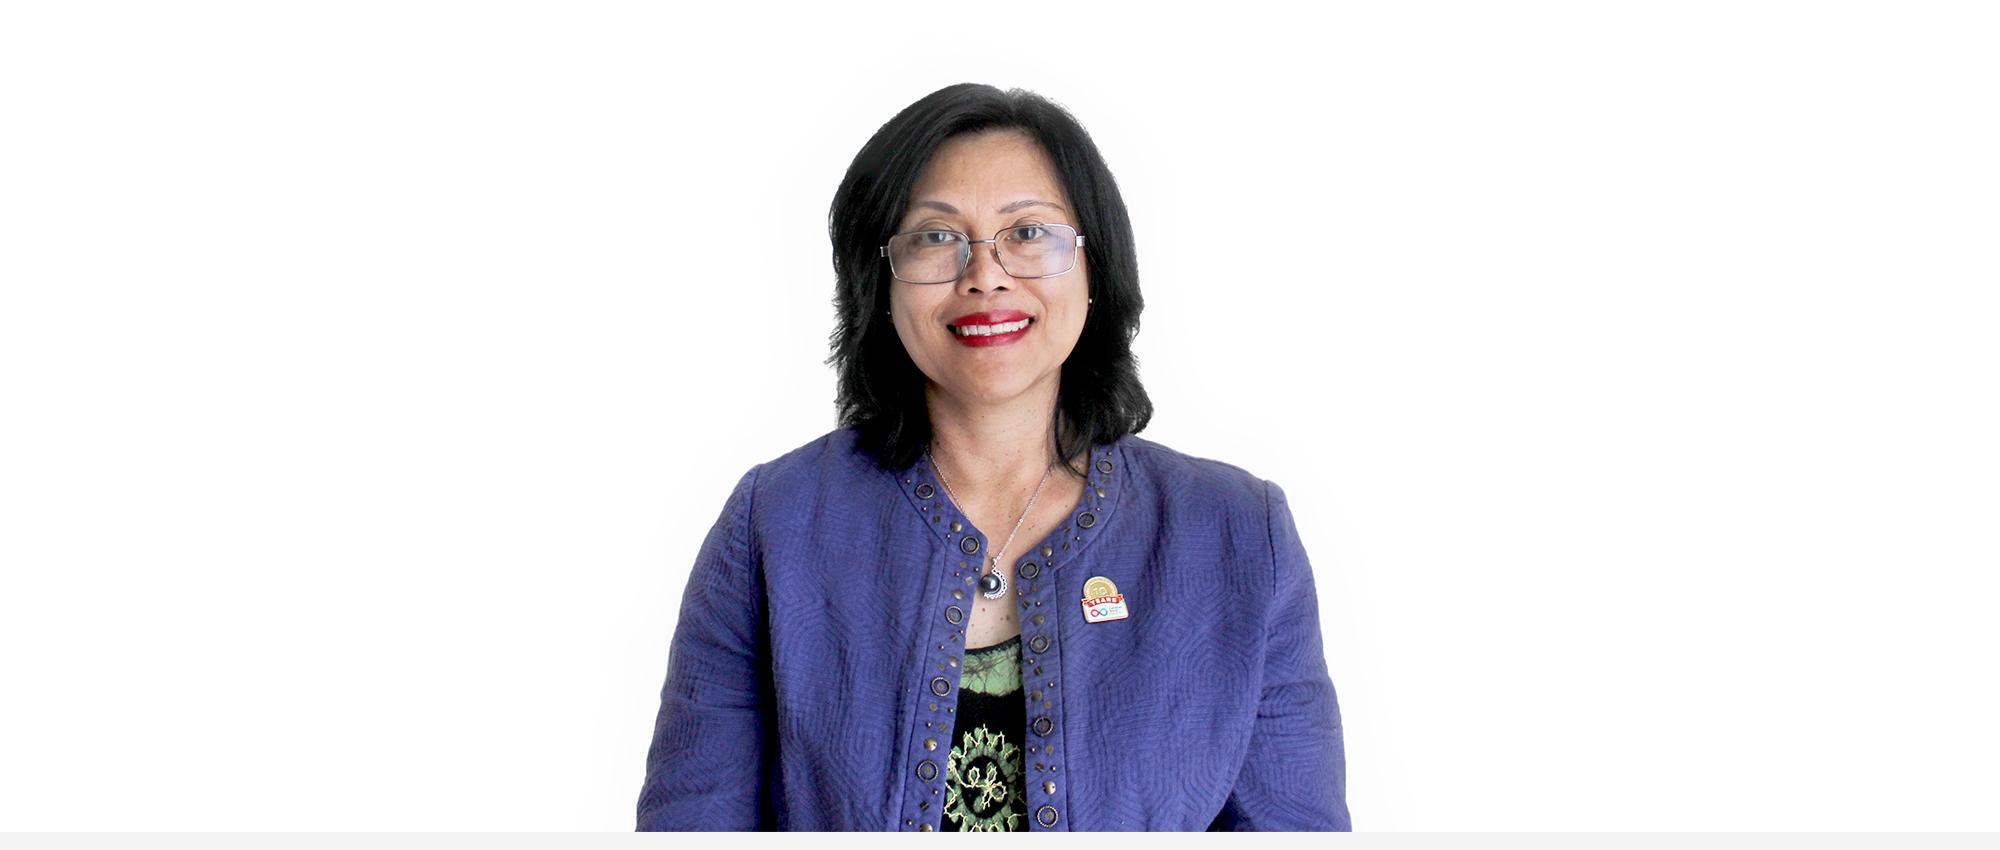 Image of Christie, a Filipino woman, wearing a blue jacket with a Canadian Blood Services pin on her lapel.